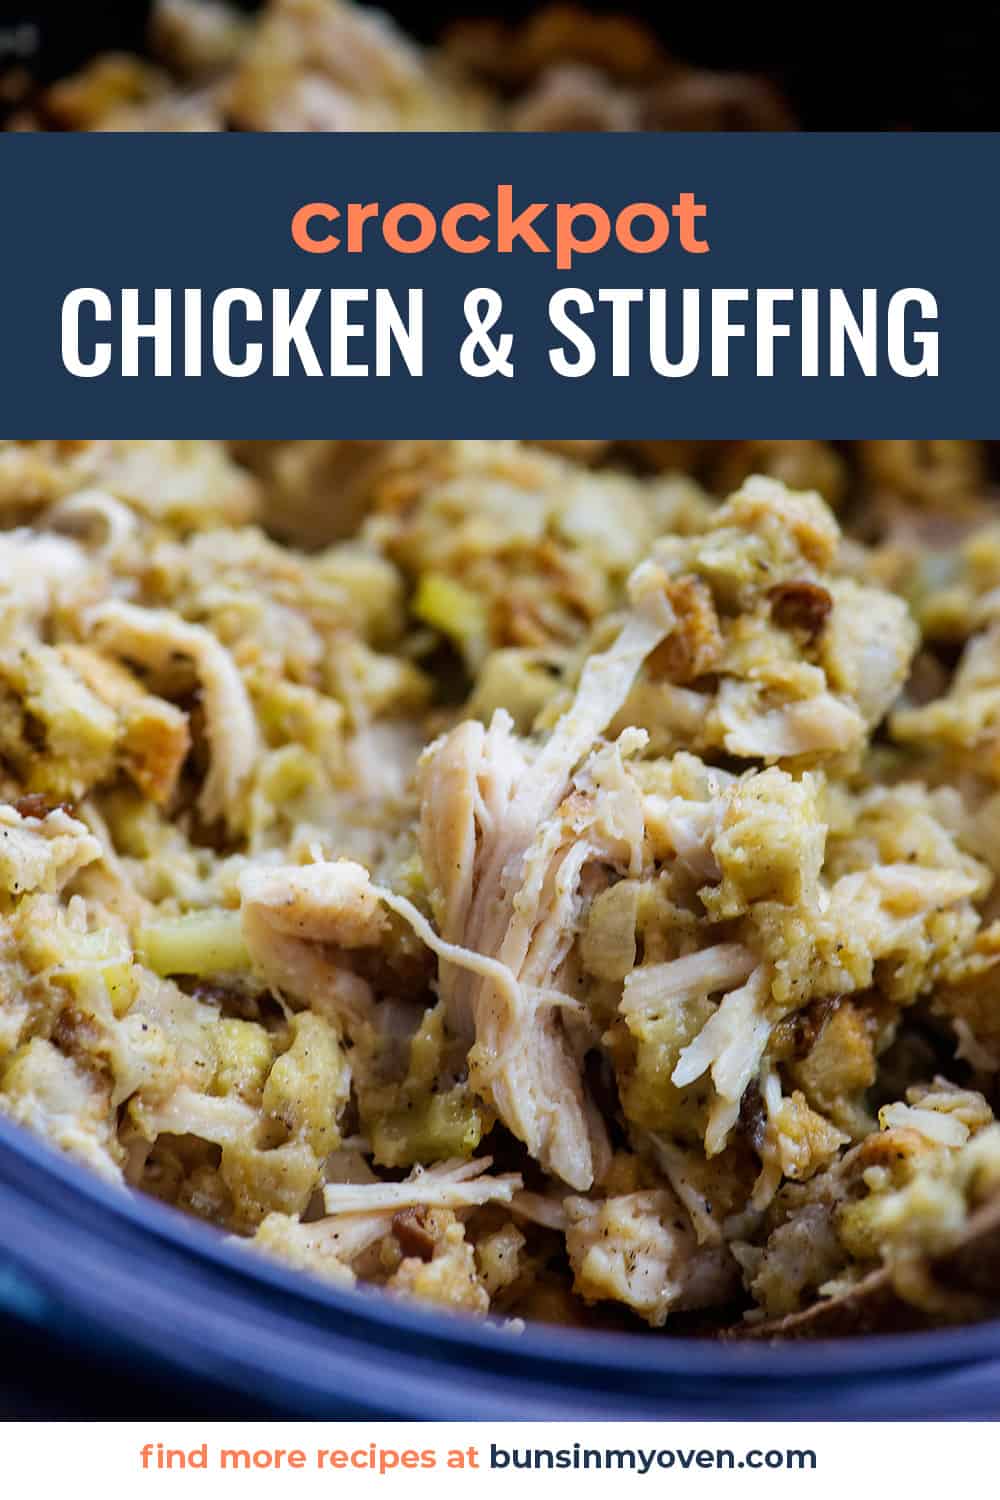 Crockpot chicken and stuffing with text for pinterest.